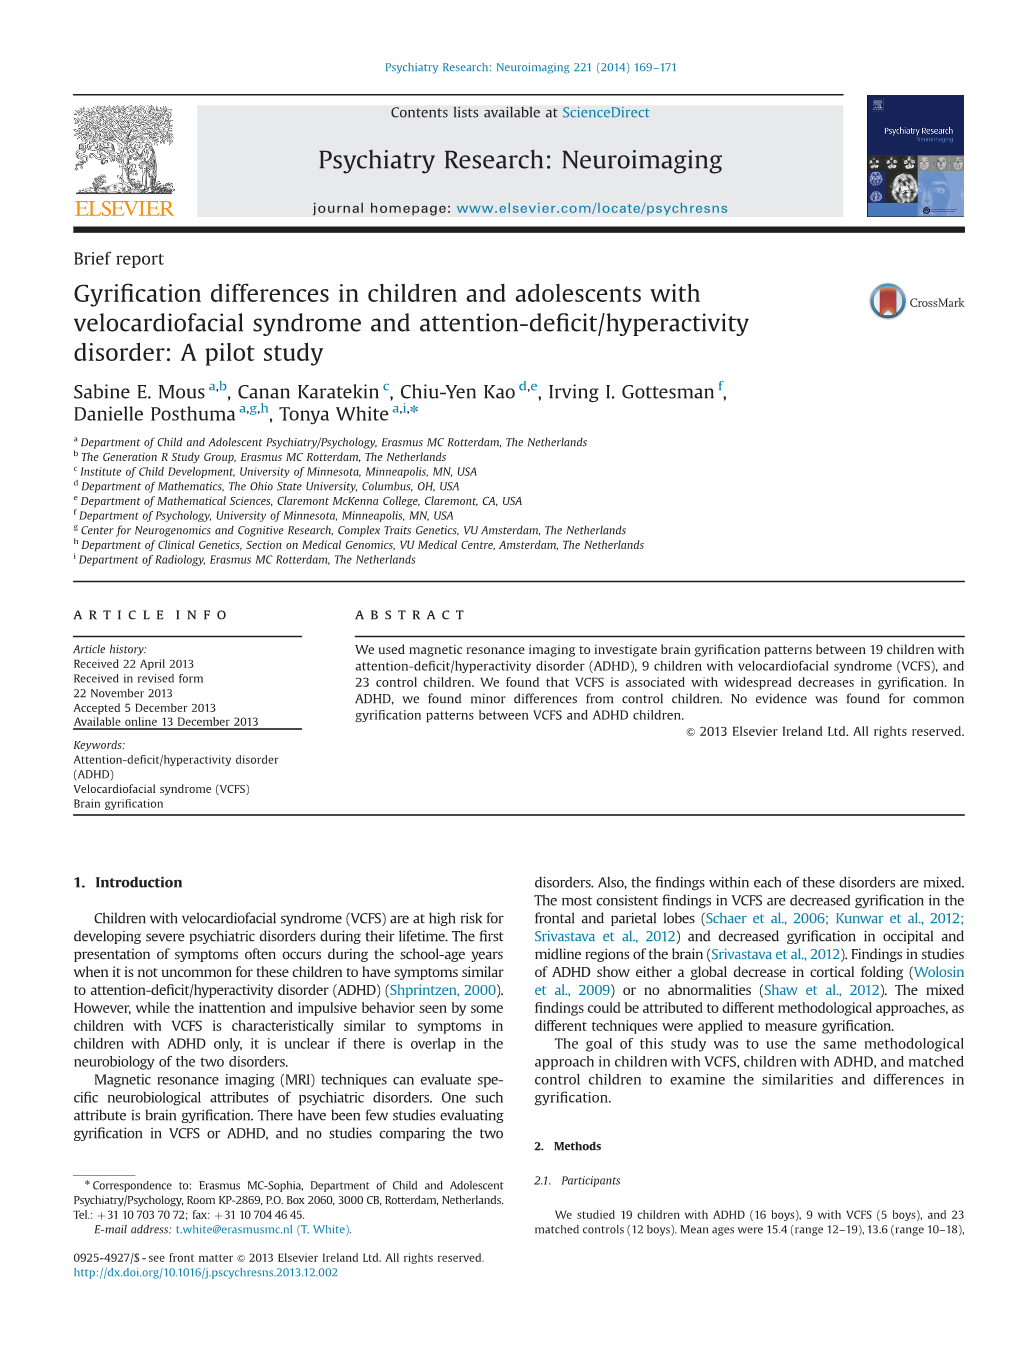 Gyrification Differences in Children and Adolescents with Velocardiofacial